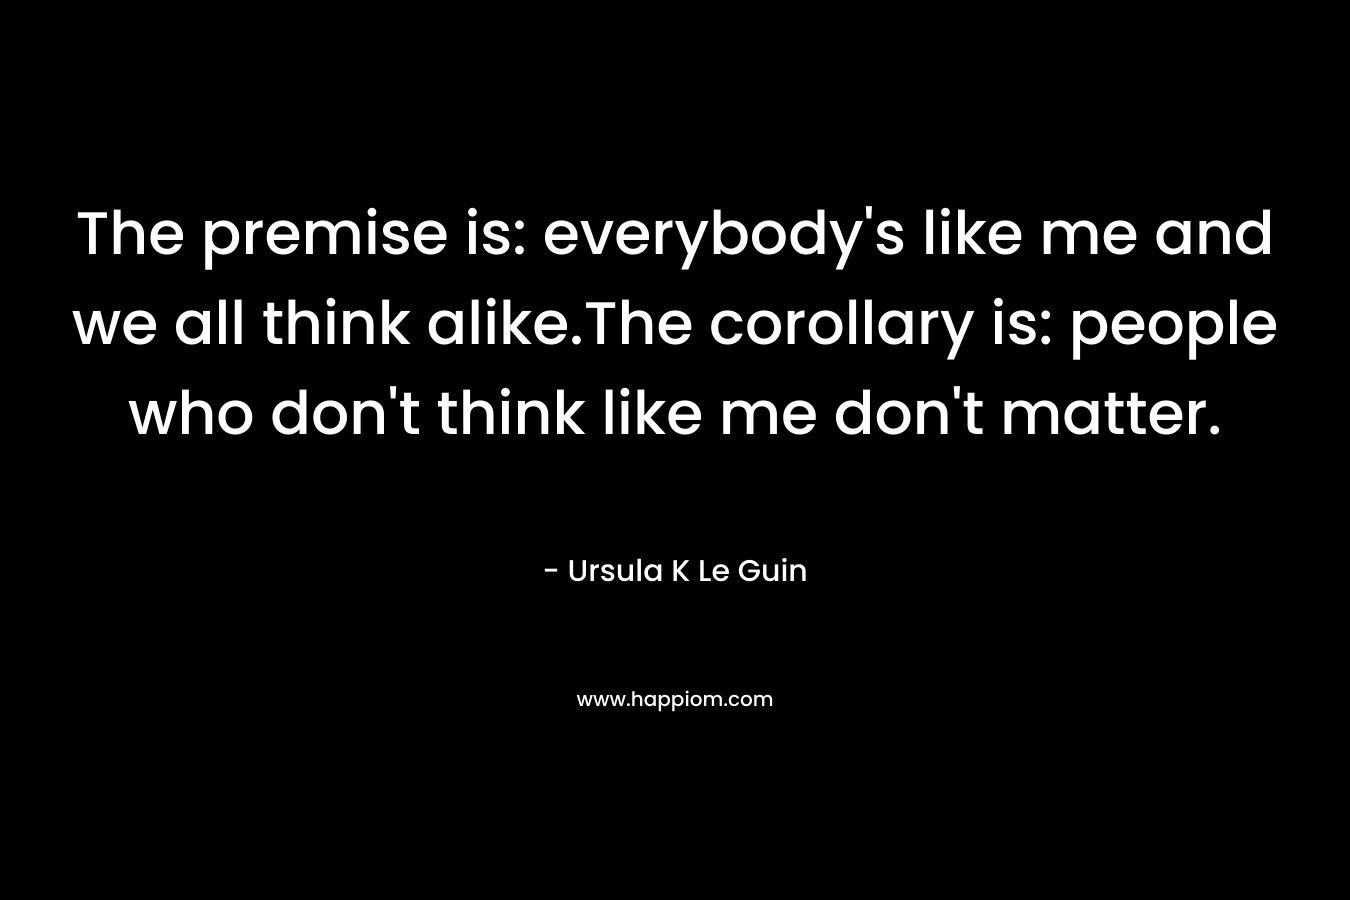 The premise is: everybody's like me and we all think alike.The corollary is: people who don't think like me don't matter.